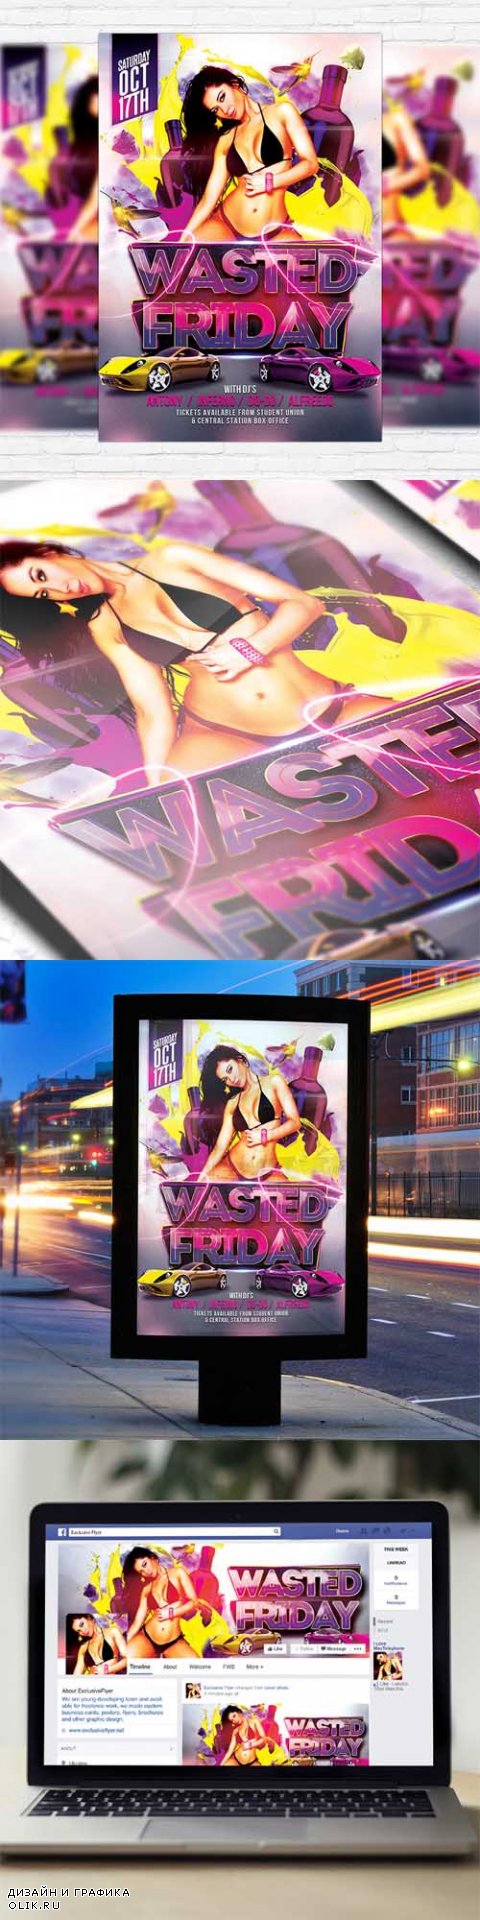 Flyer Template - Wasted Friday + Facebook Cover